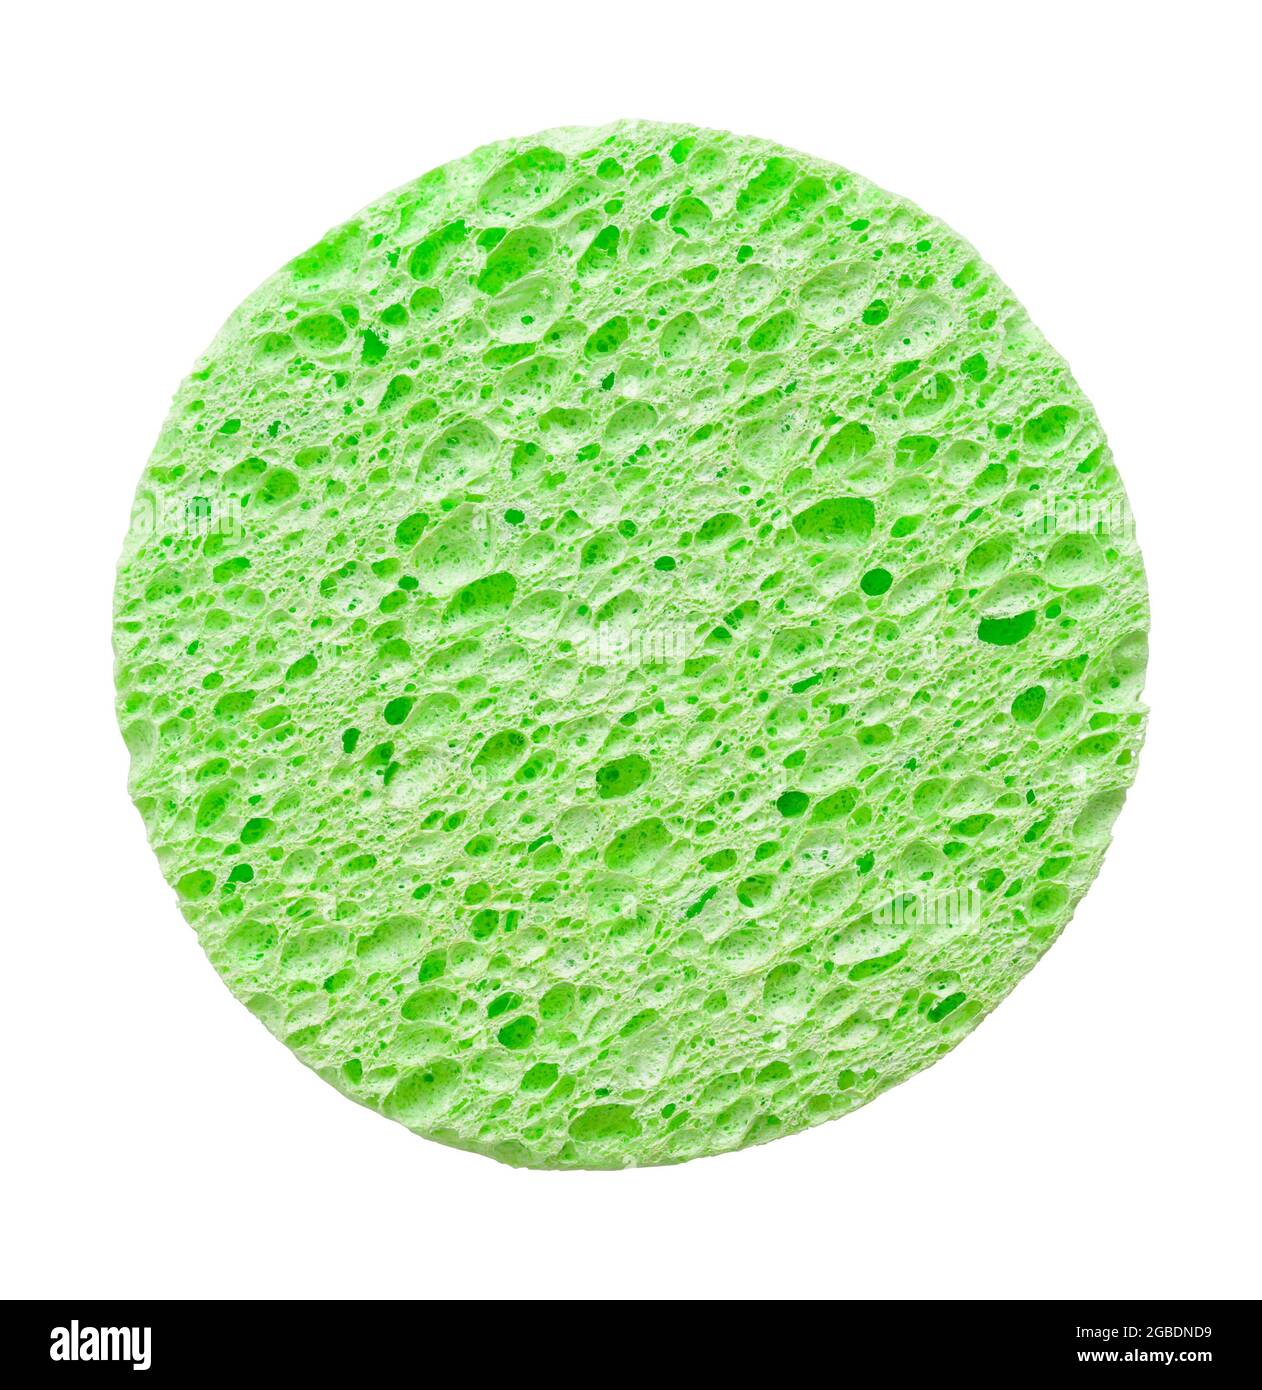 Round Cosmetic Make Up Sponge Cut Out on White. Stock Photo